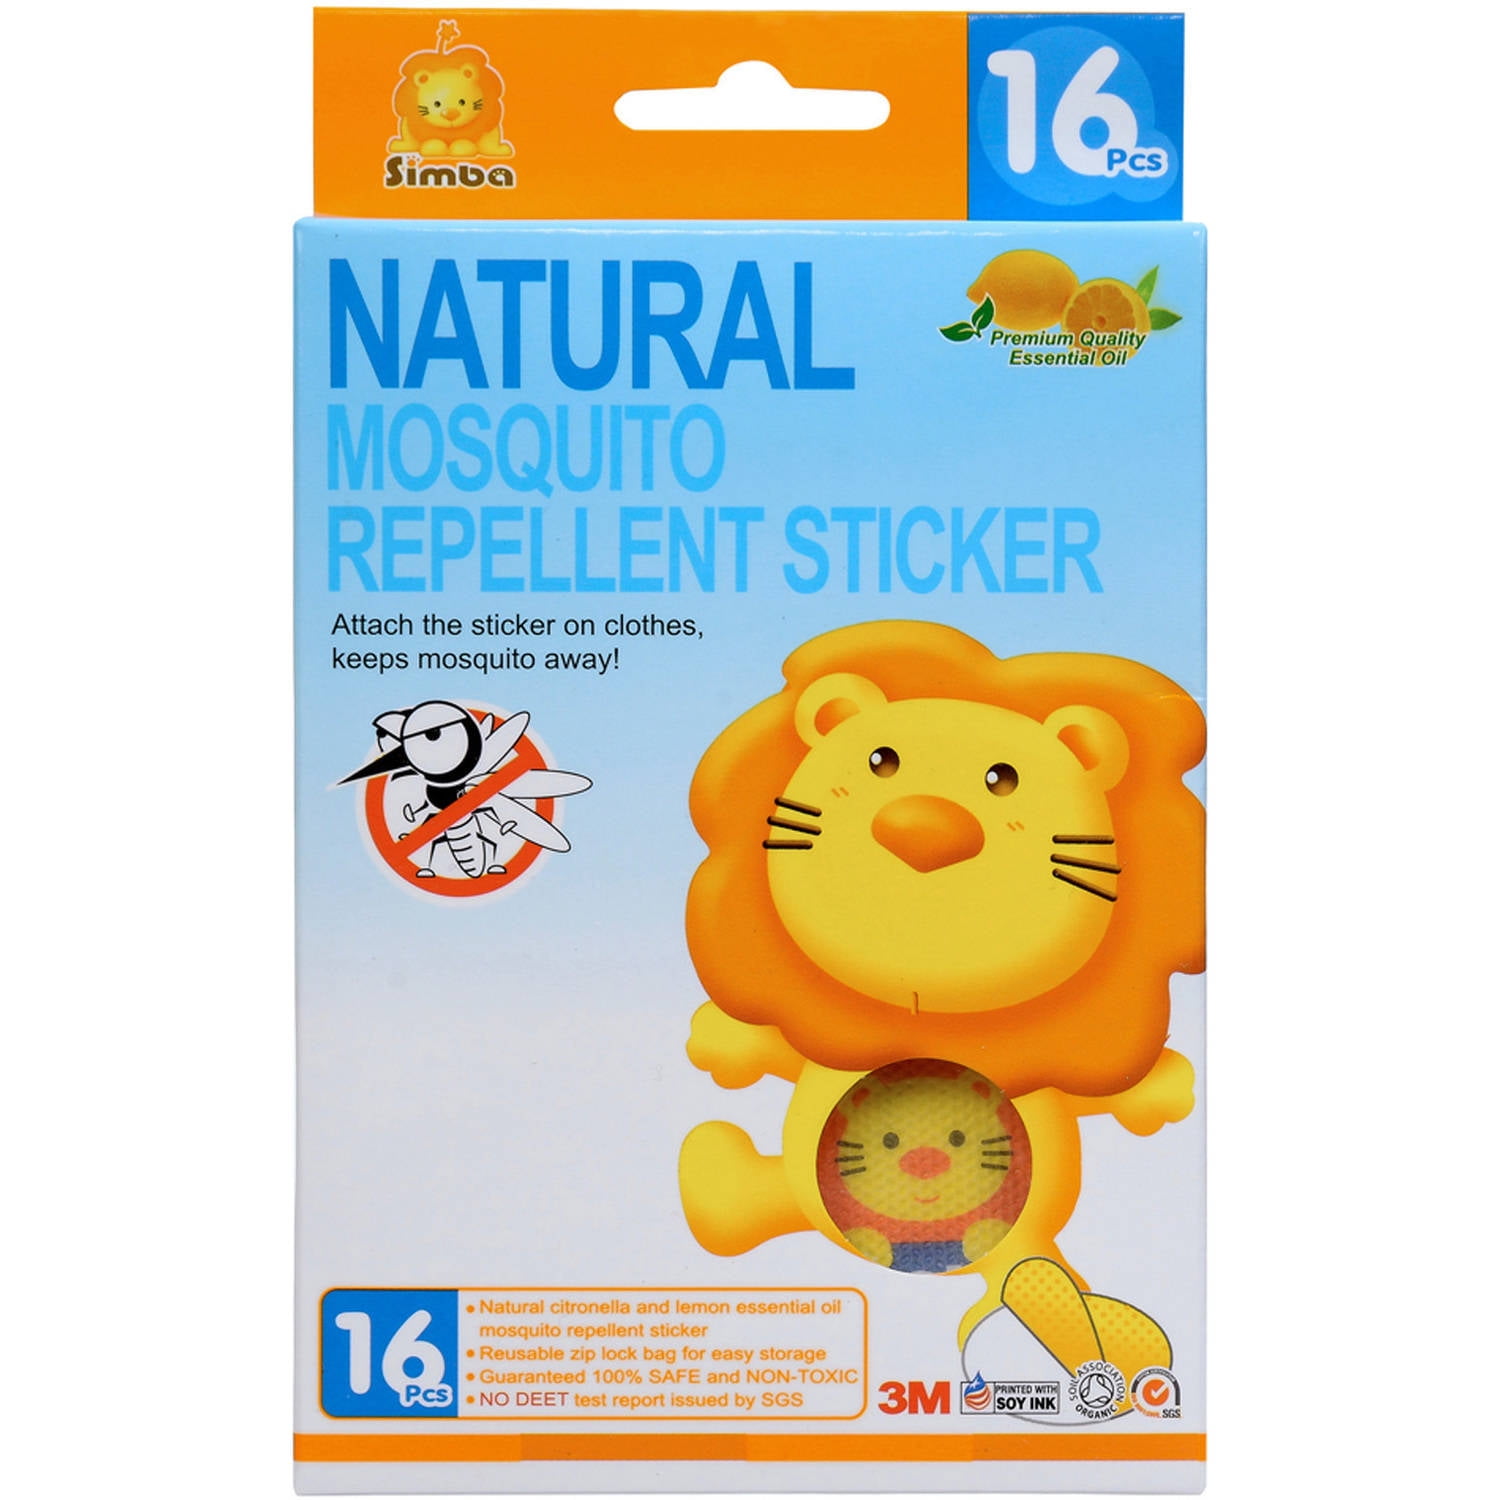 120pcs SMILEY INSECT MOSQUITO NATURAL REPELLENT STICKERS PATCHES CITRONELLA OIL